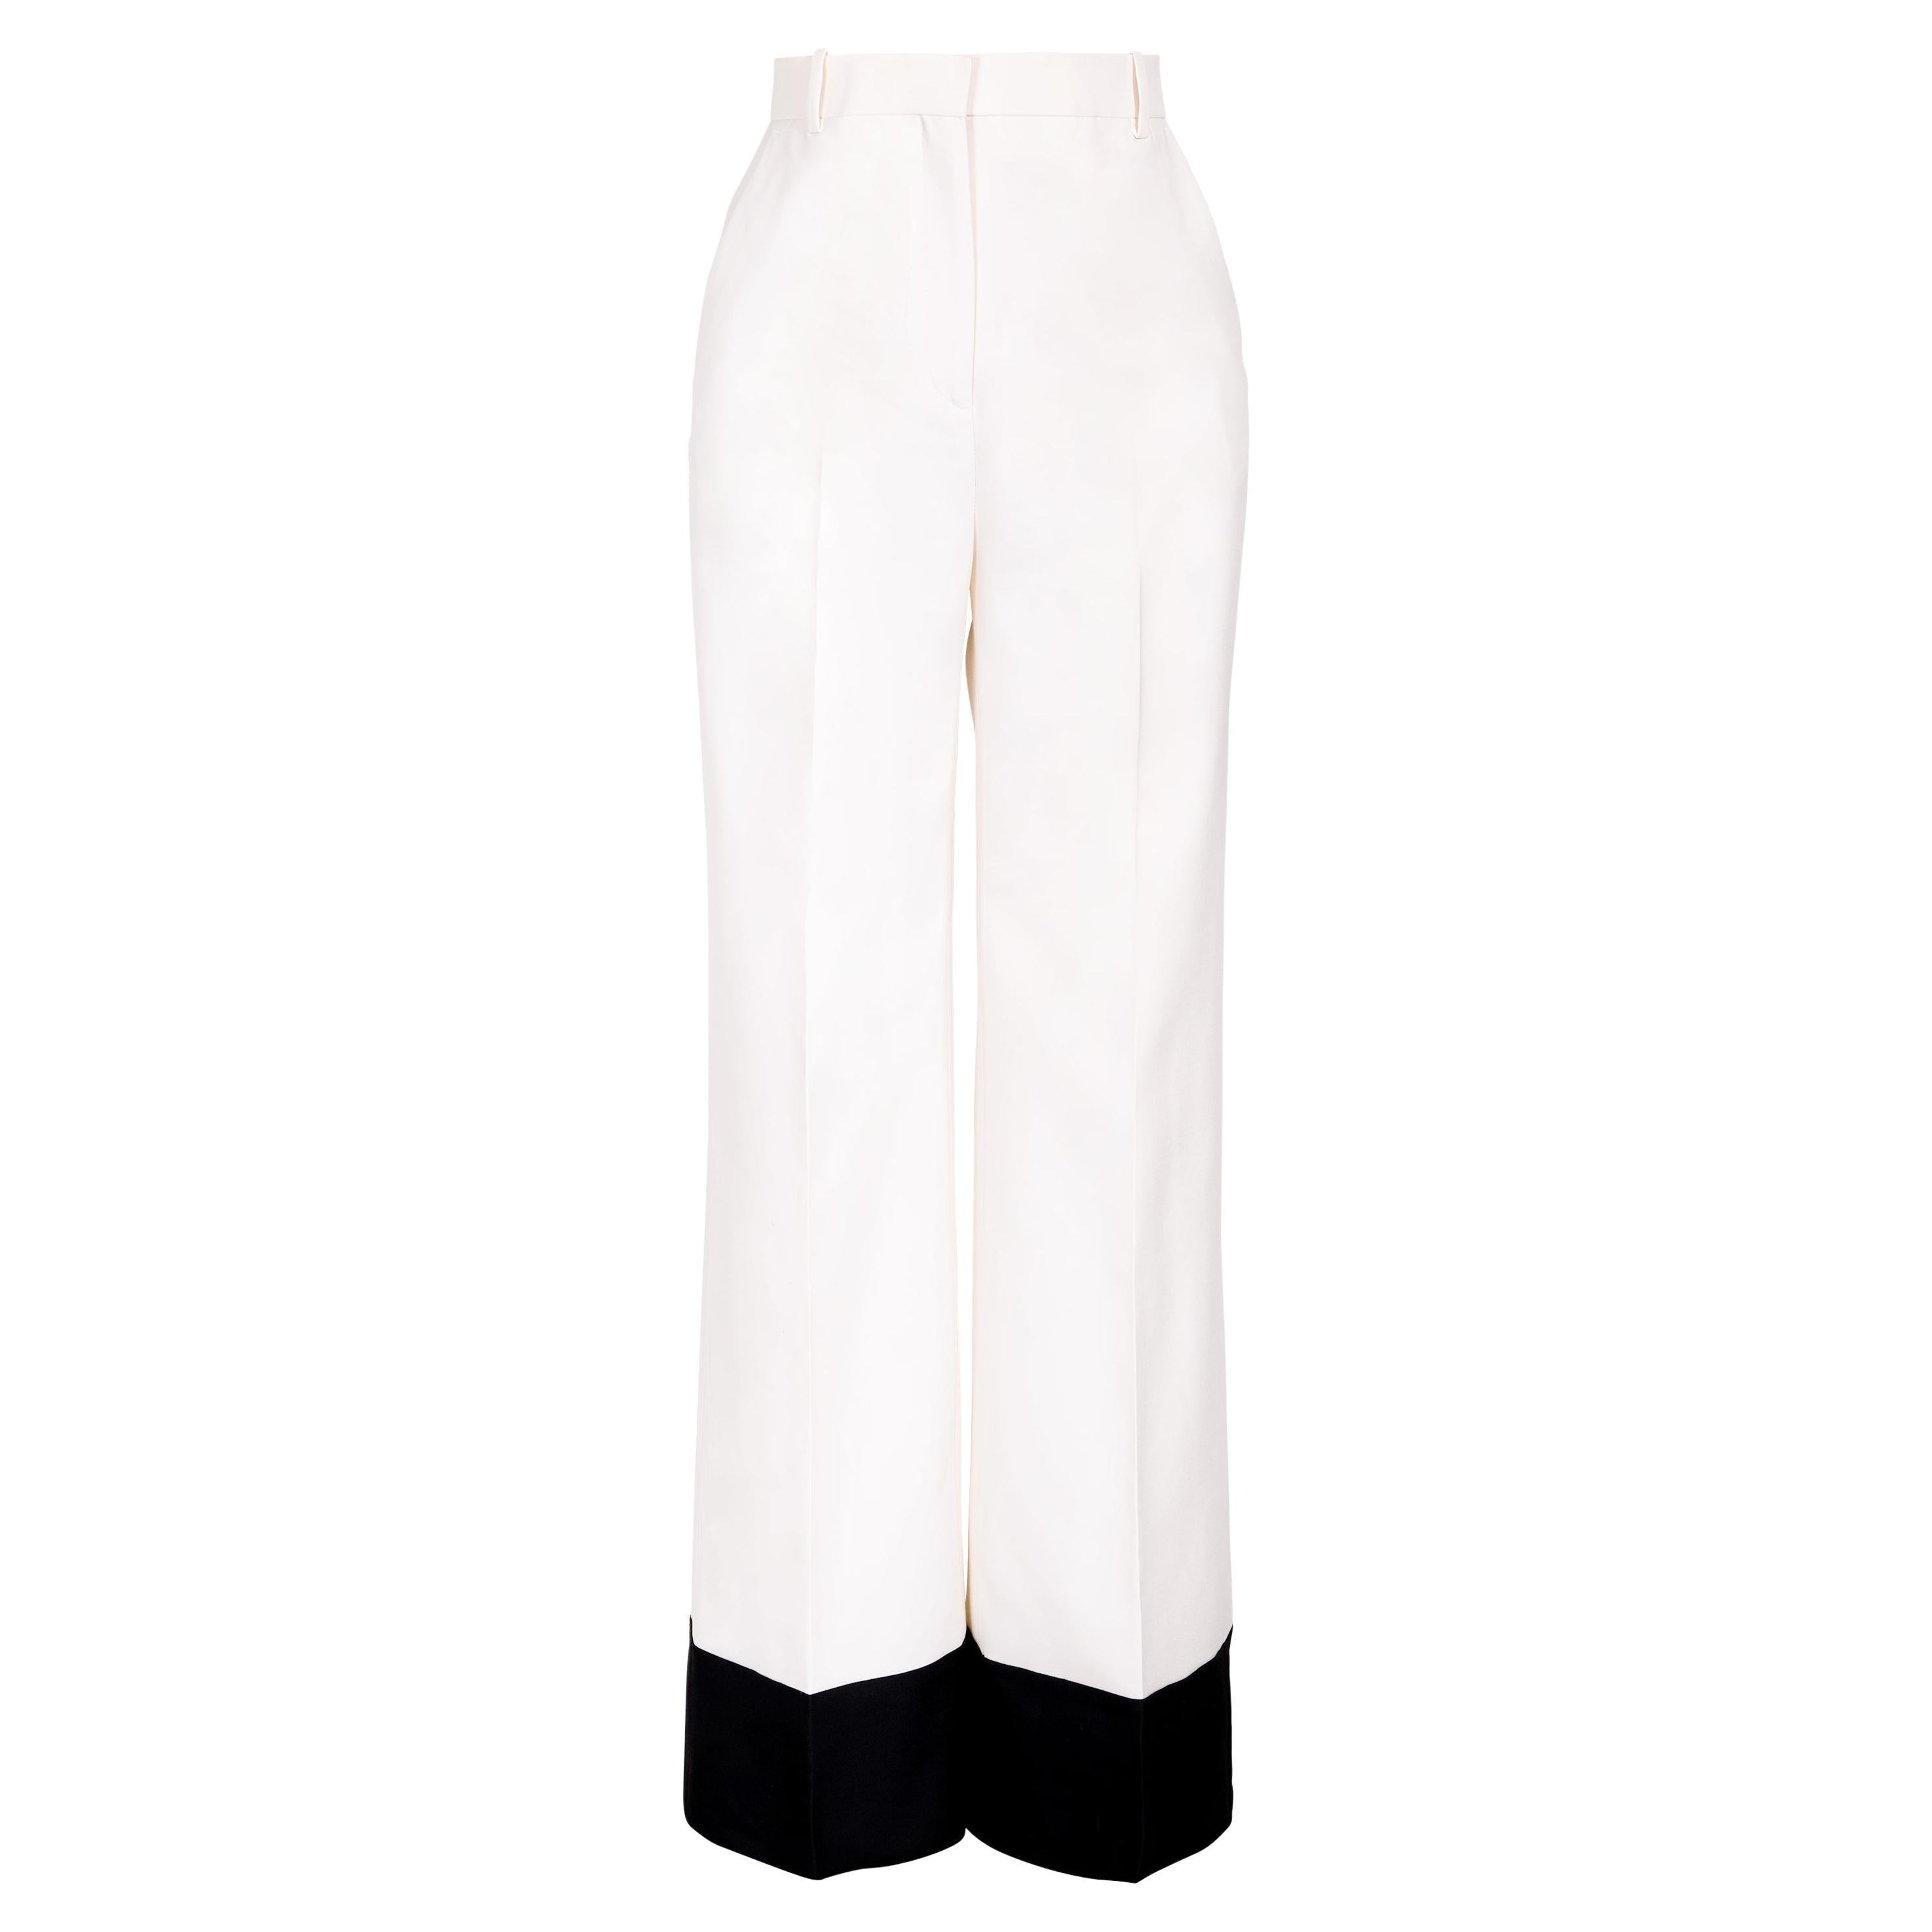 Resort 2013 Old Céline by Phoebe Philo White and Black Color Block Trousers